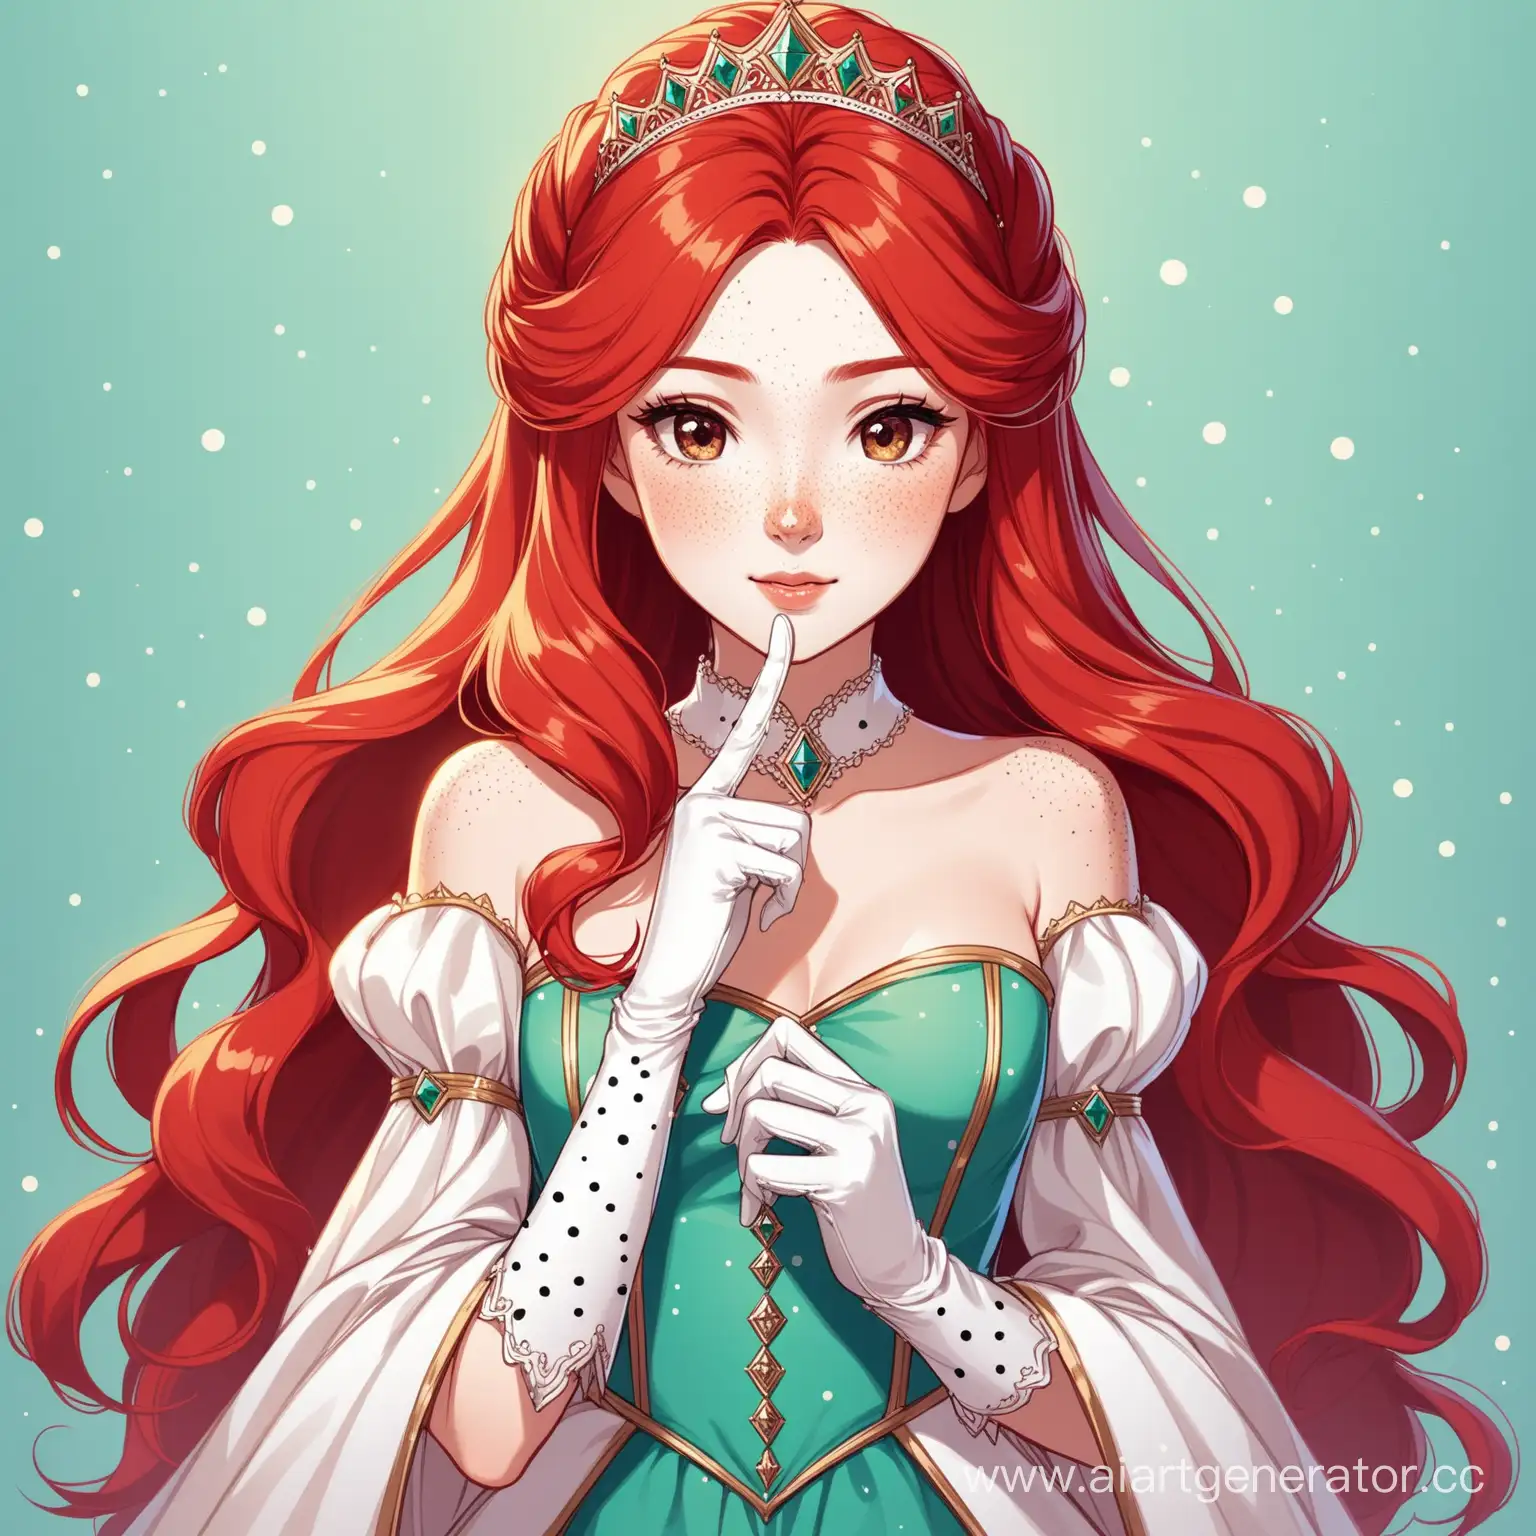 RedHaired-Aristocratic-Princess-in-Elegant-Dress-with-Freckles-and-Glove